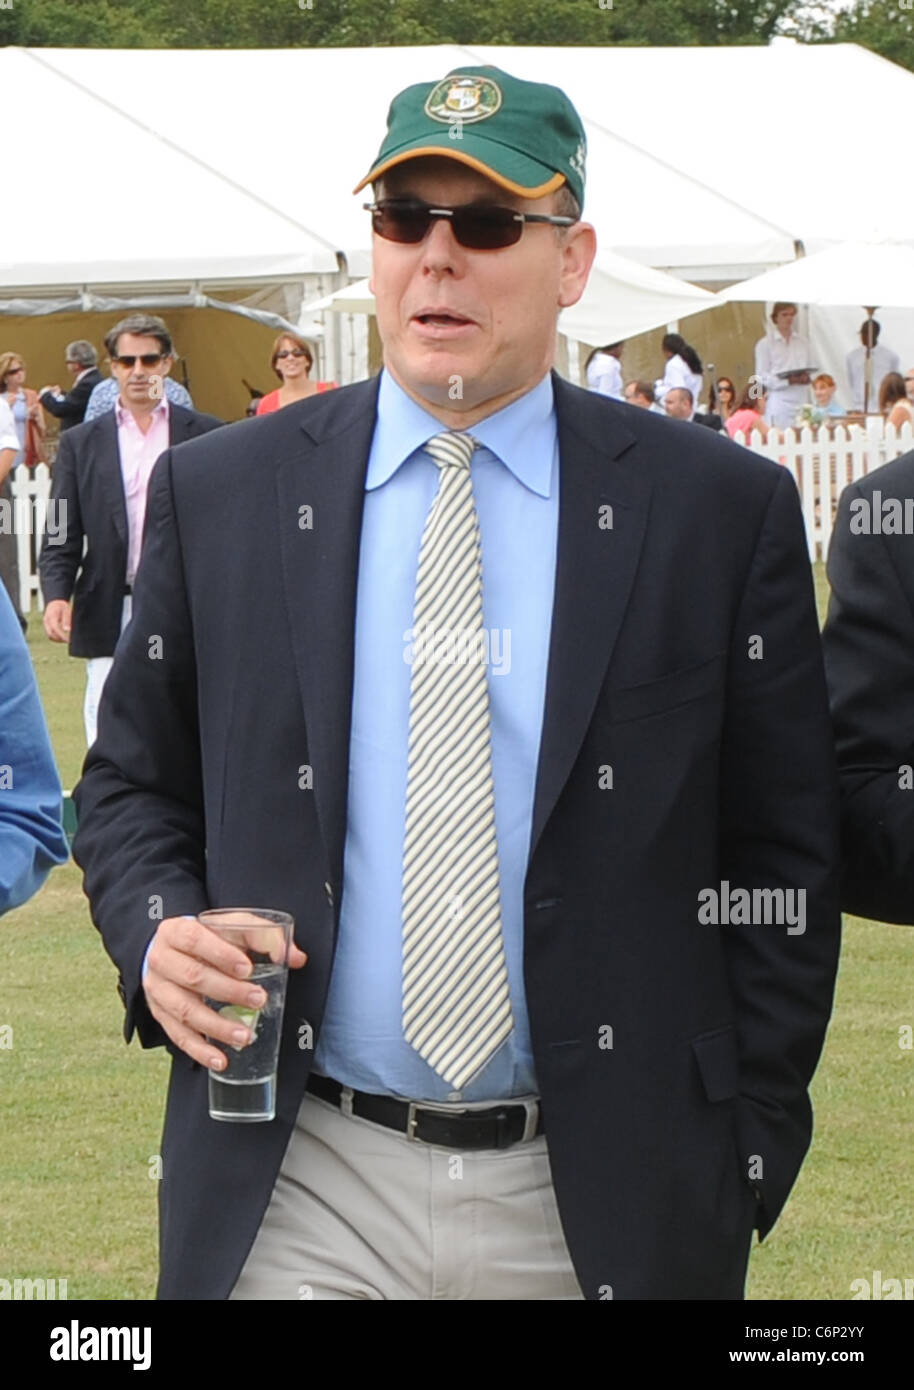 Prince Albert of Monaco during the Asprey World Class Cup at Hurtwood Park Polo Club Surrey, England - 17.07.10 Stock Photo